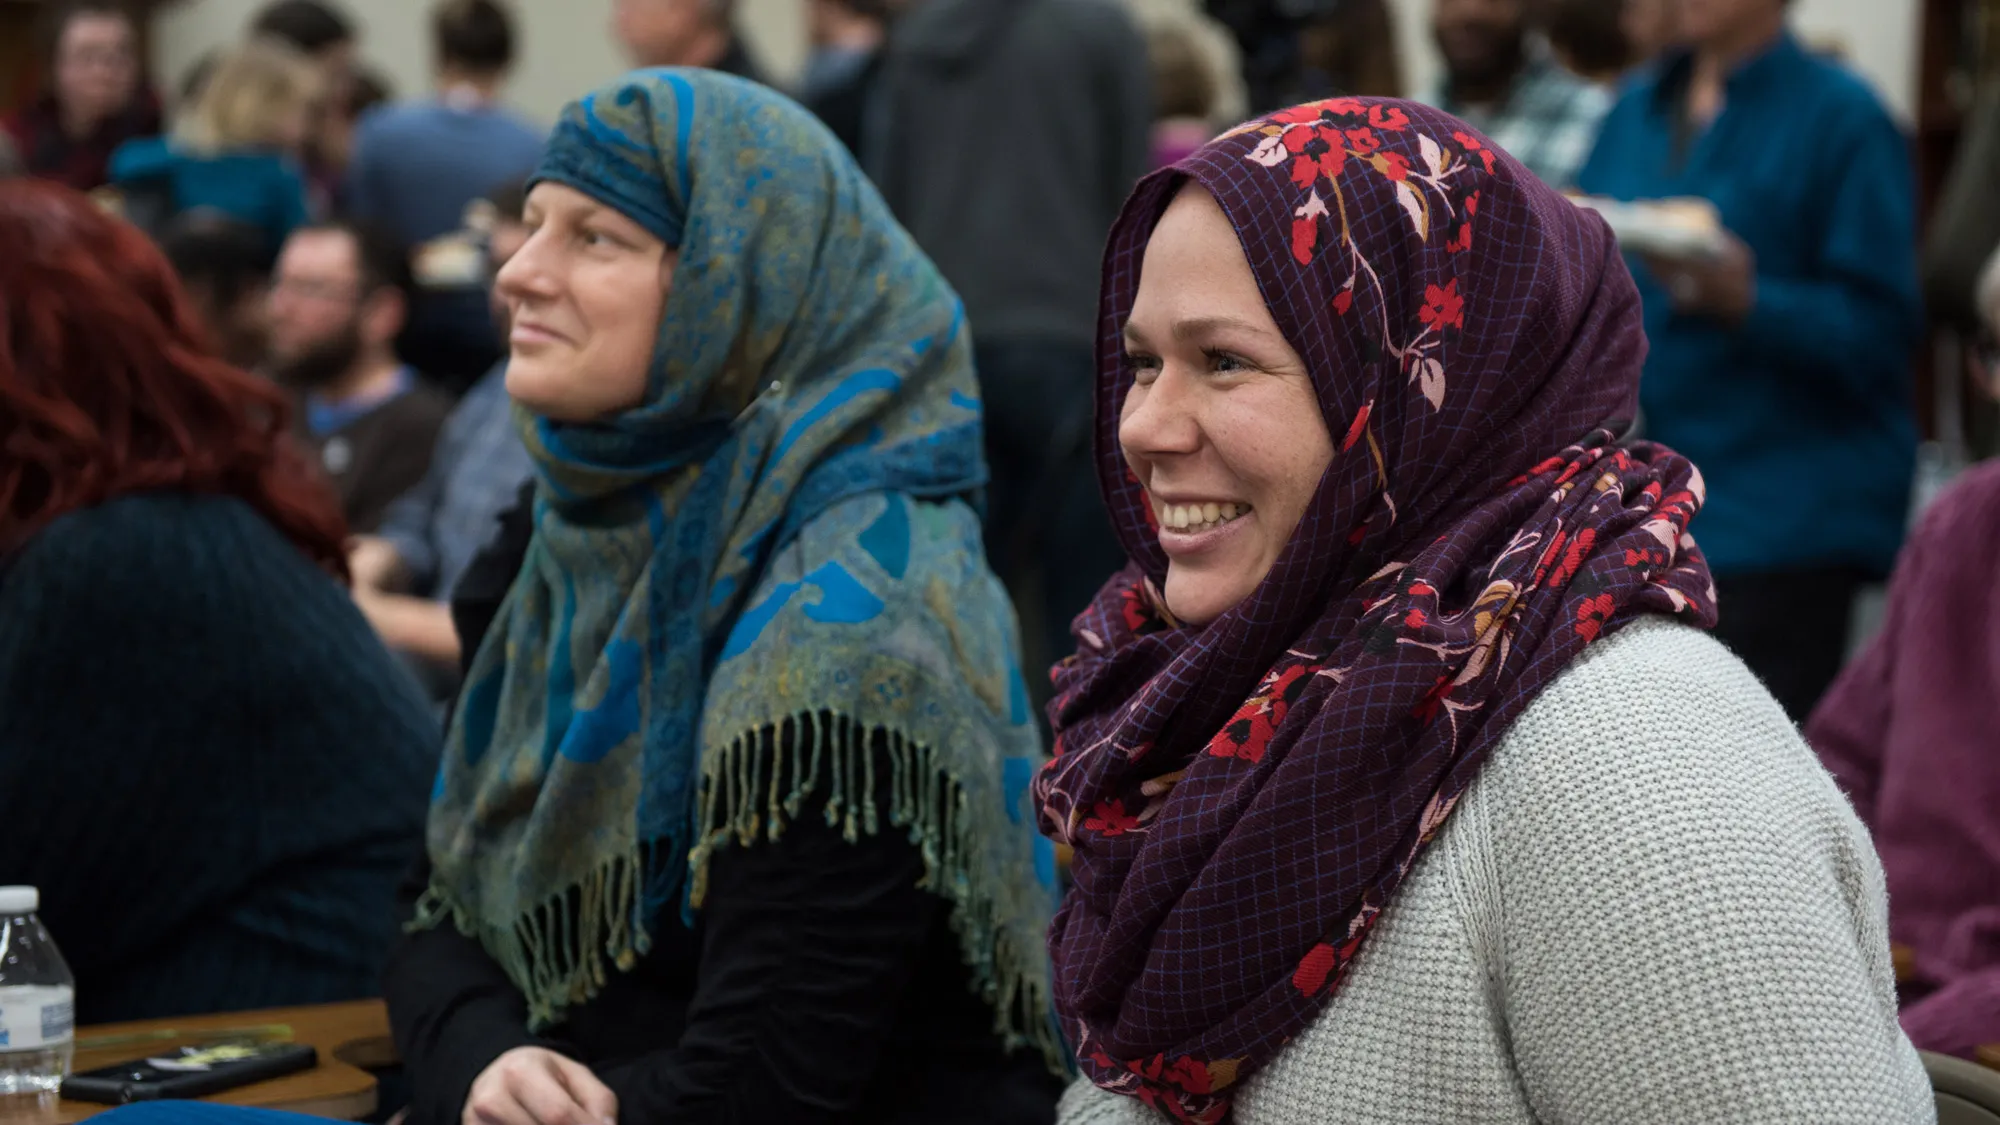 Gretchen Klingler wear a purple headscarf and smiles as she listens to someone out of the photo. Beside her is a white woman wearing a blue paisley headscarf and people surround them chatting with one another. 